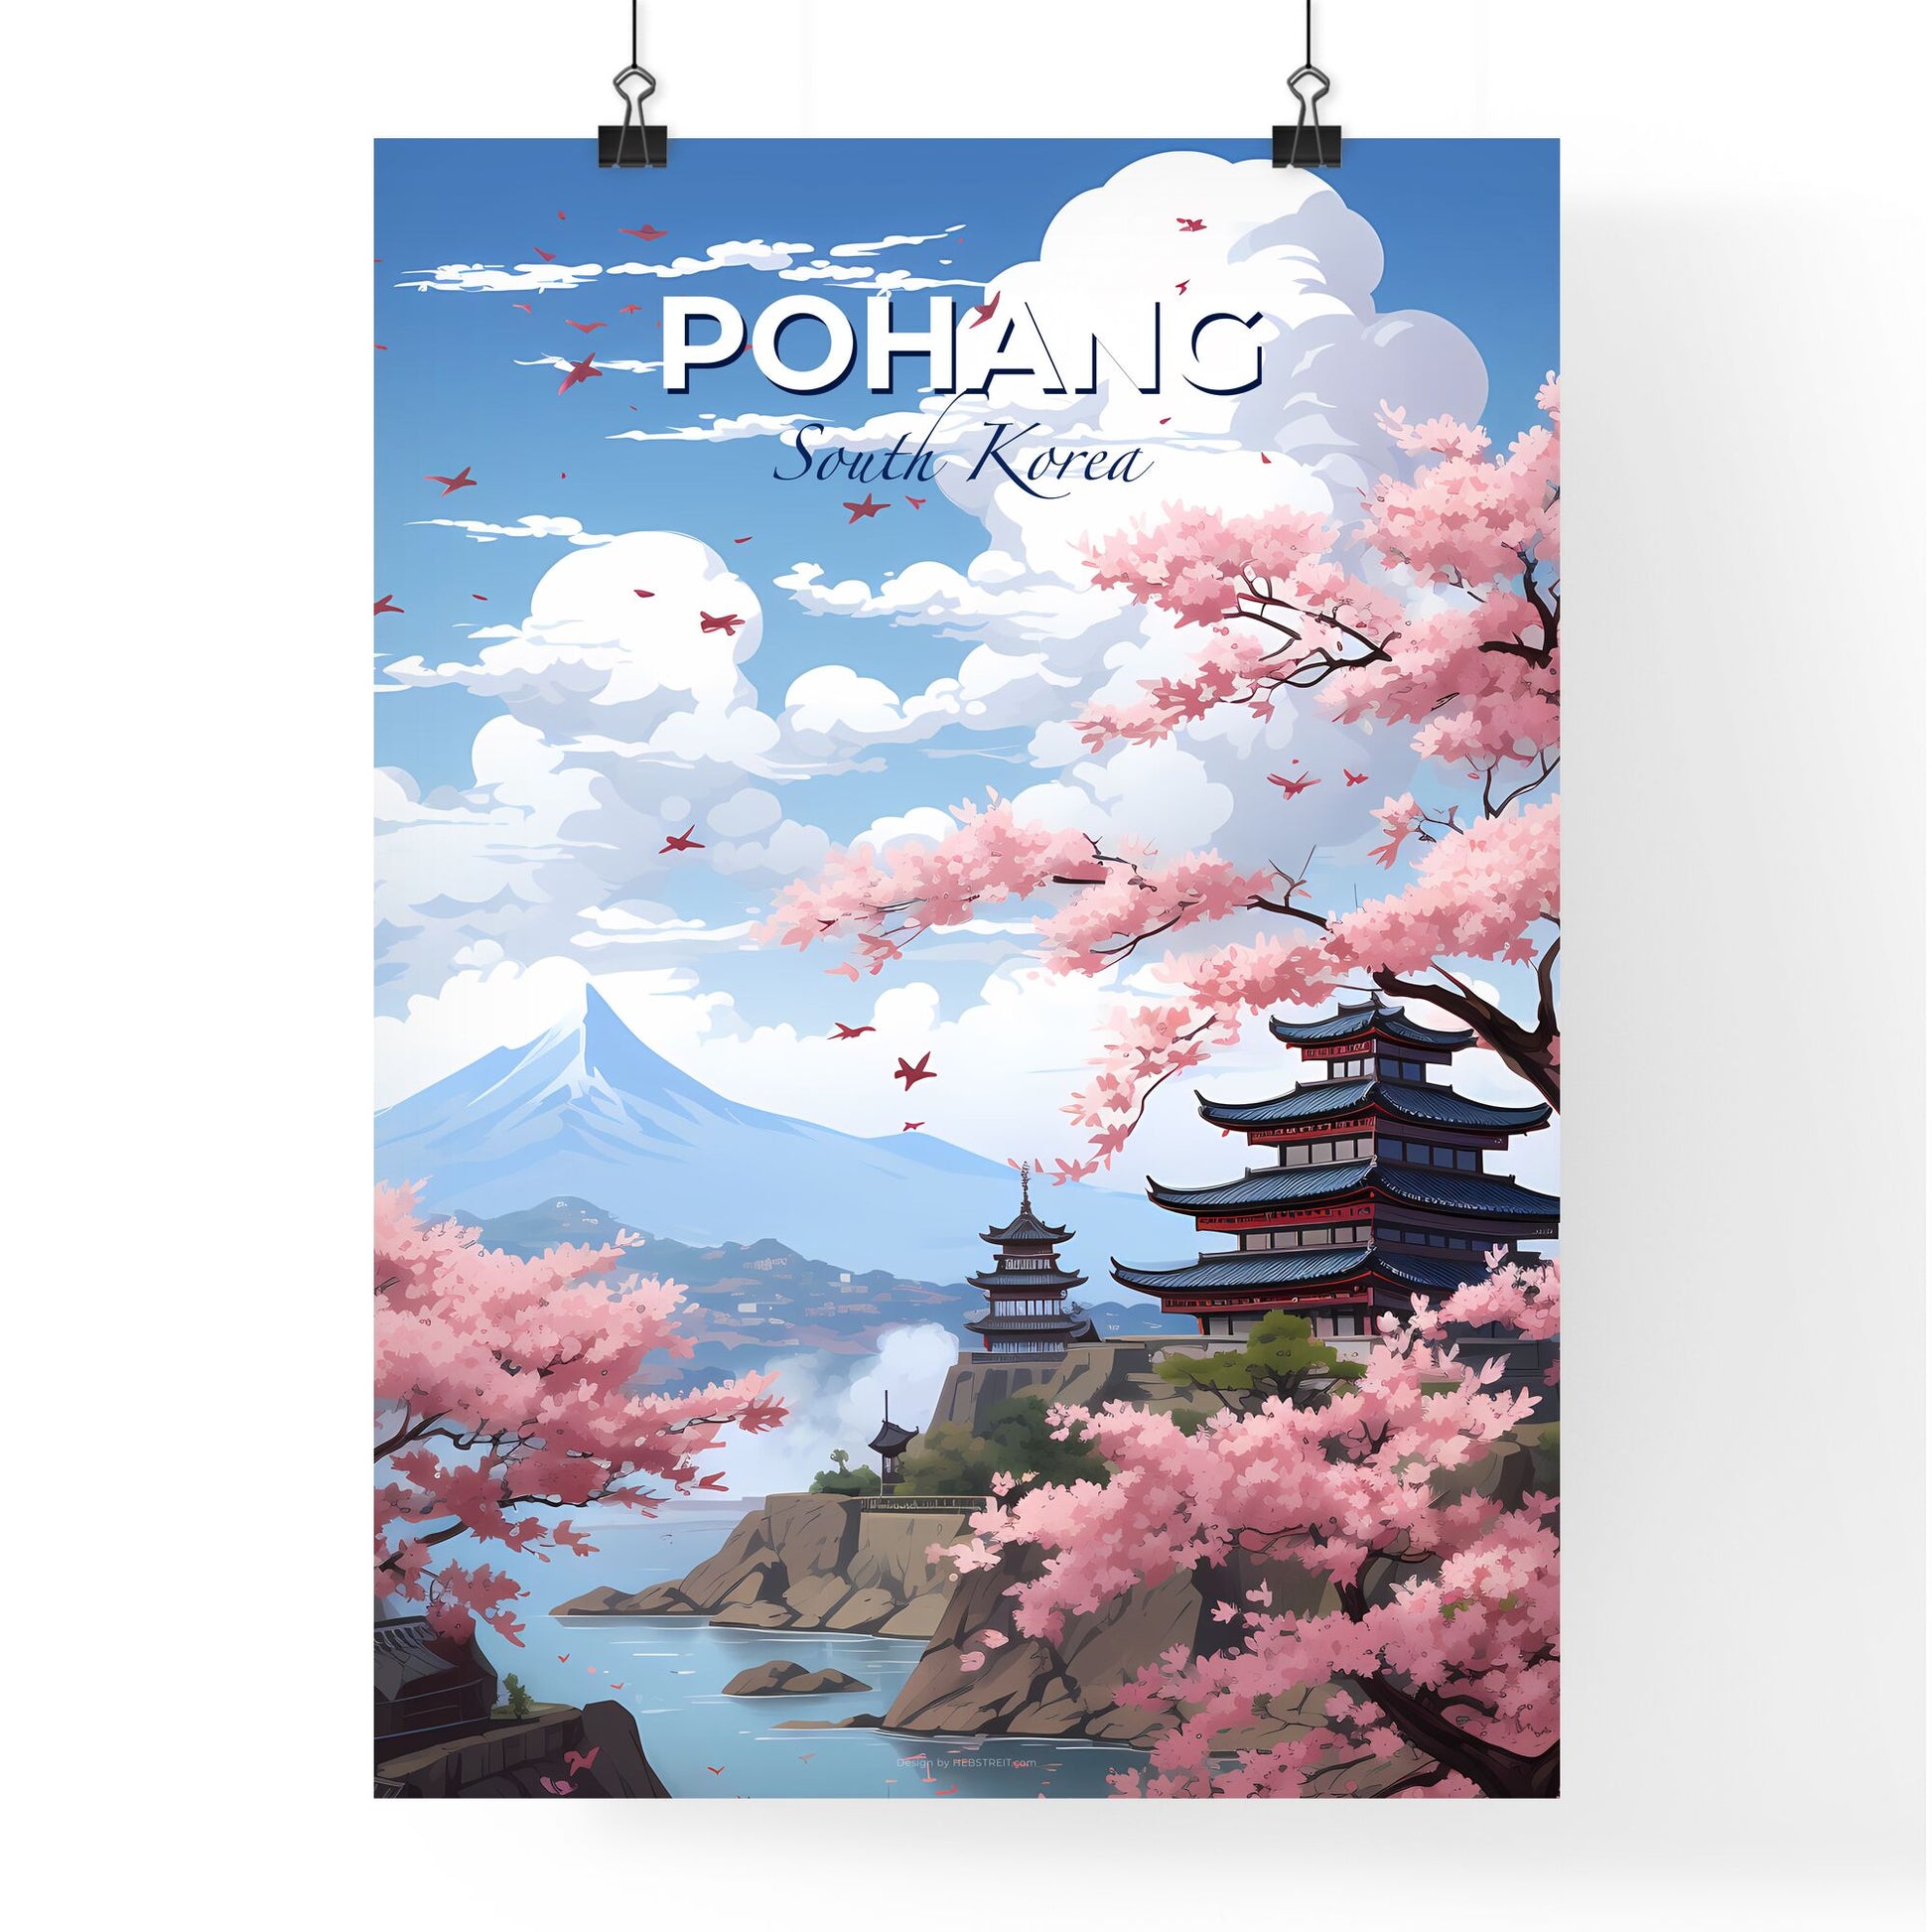 Tranquil Pagoda Landscape with Cherry Blossoms, Pohang Skyline Artwork with Vibrant Colors and Artistic Flair Default Title